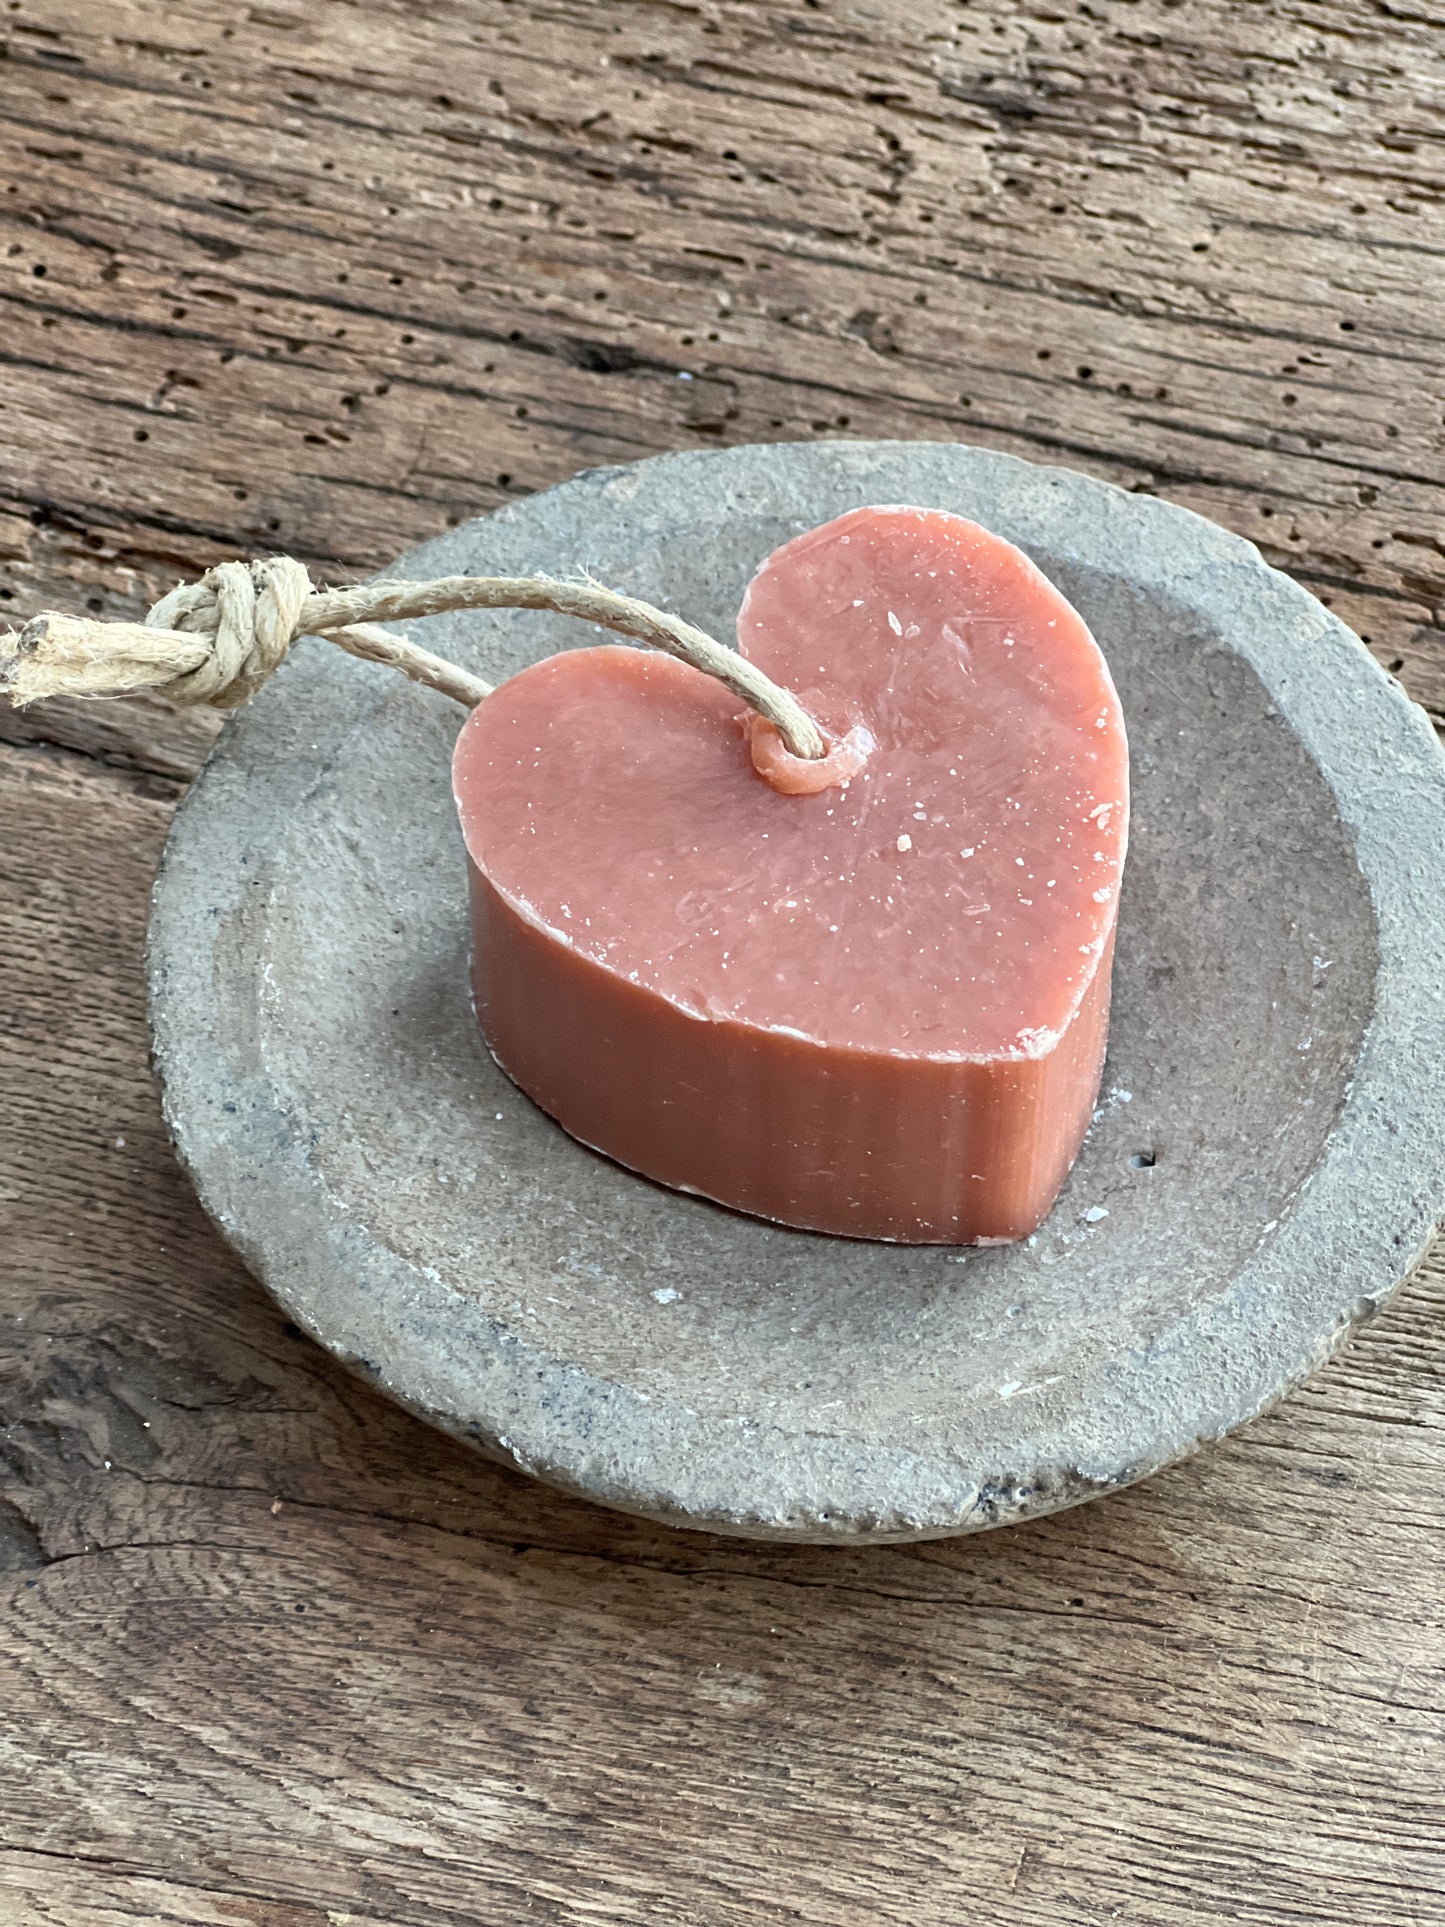 Soap heart shape on cord, old pink